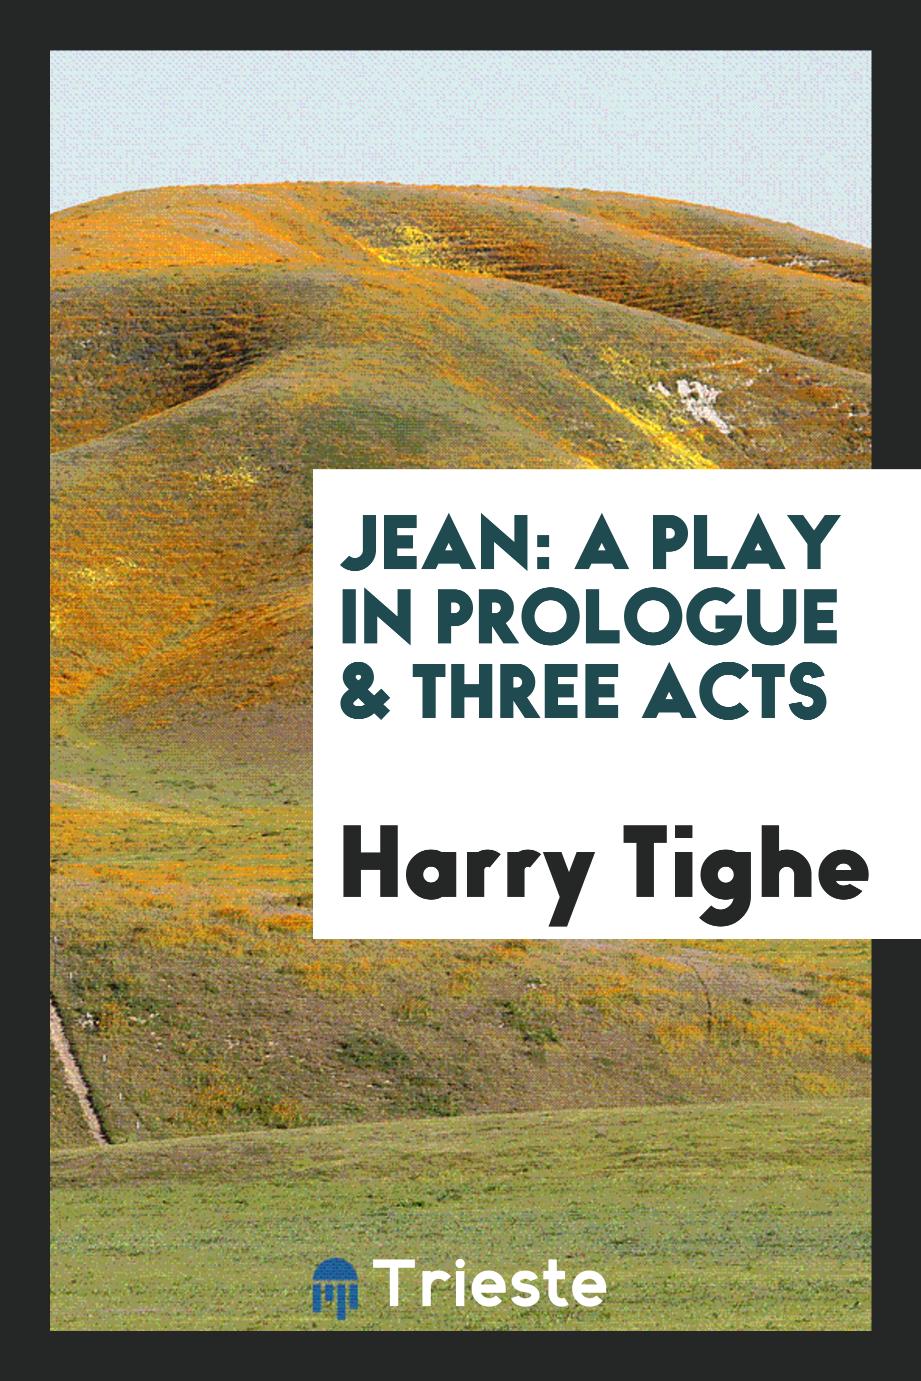 Jean: A Play in Prologue & Three Acts